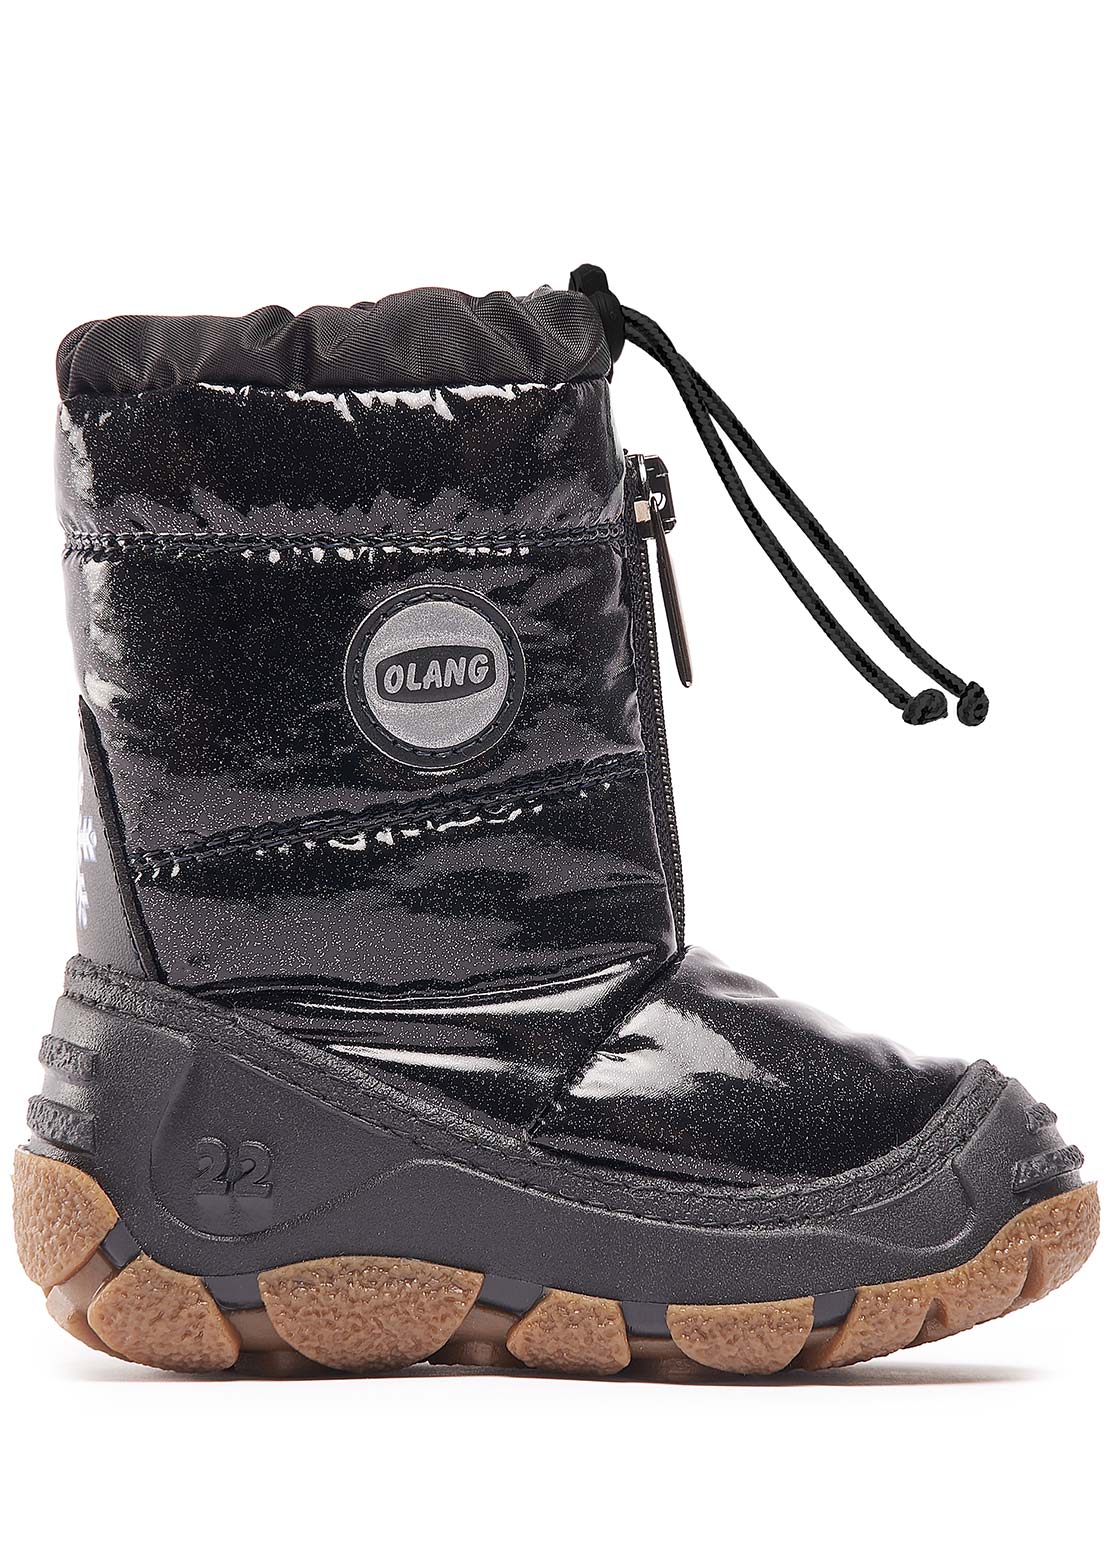 Olang Toddler Eolo Boots Ice Nero